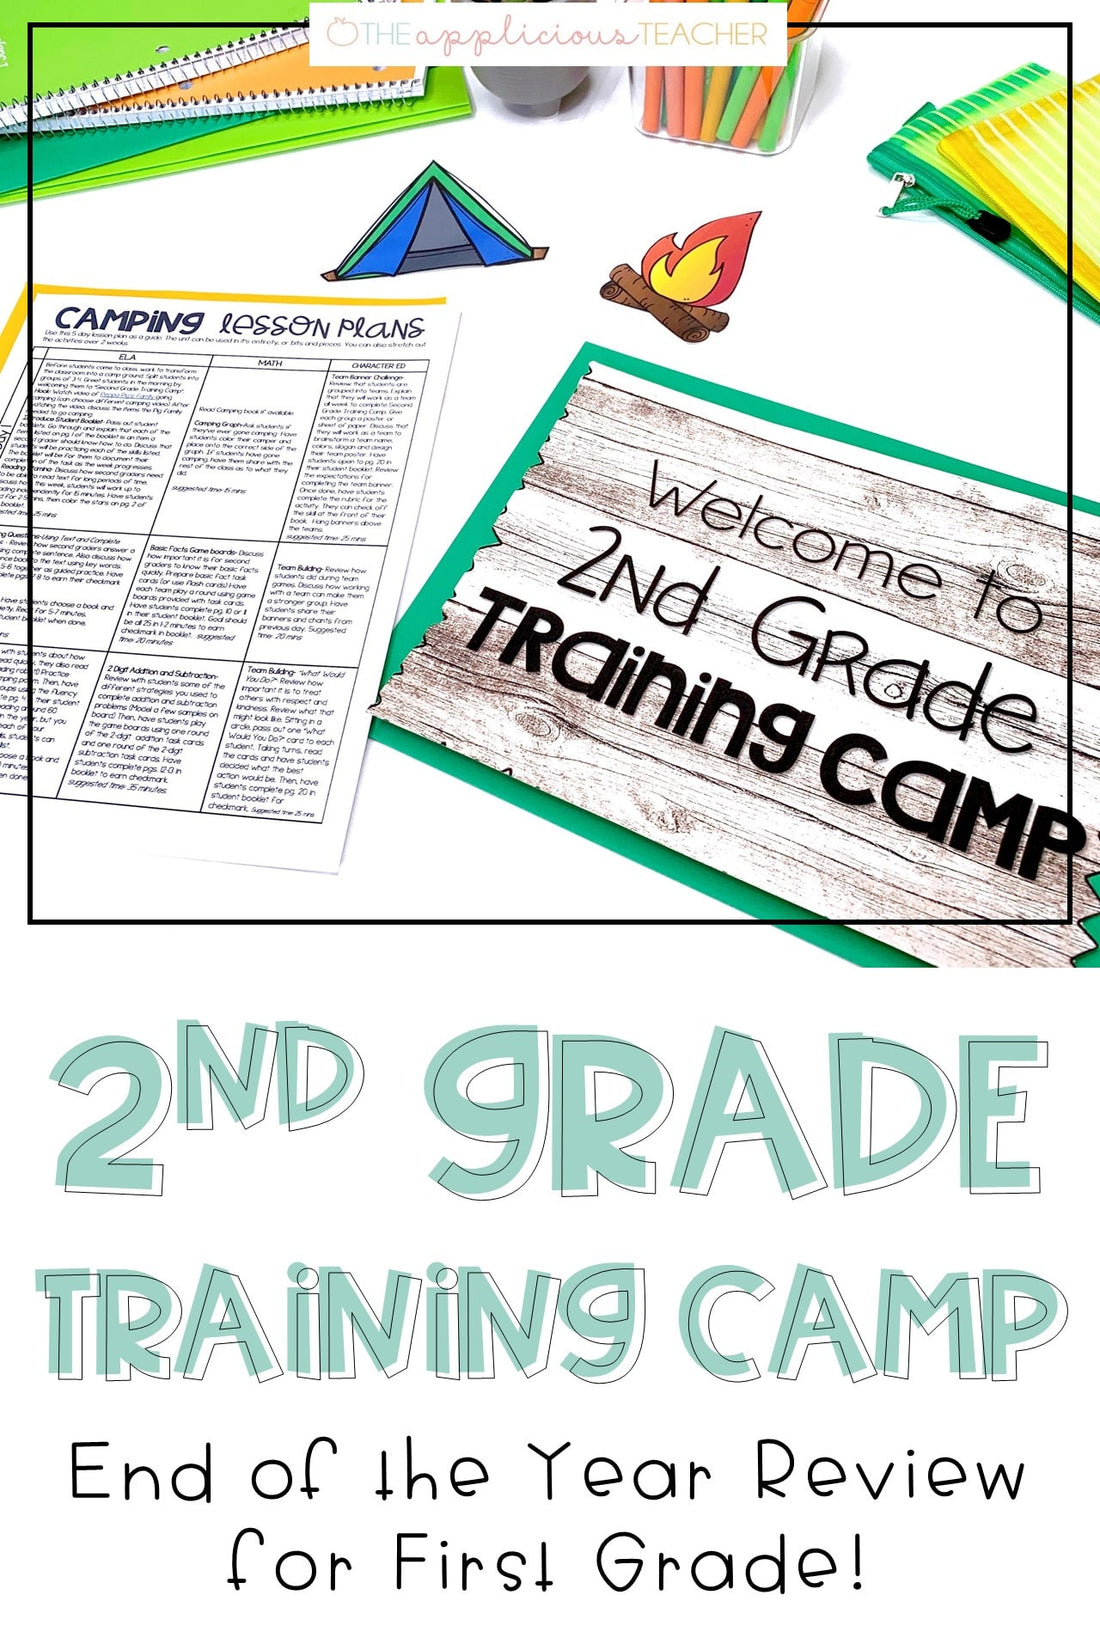 Second Grade Training Camp: End of the Year Review for 1st Grade